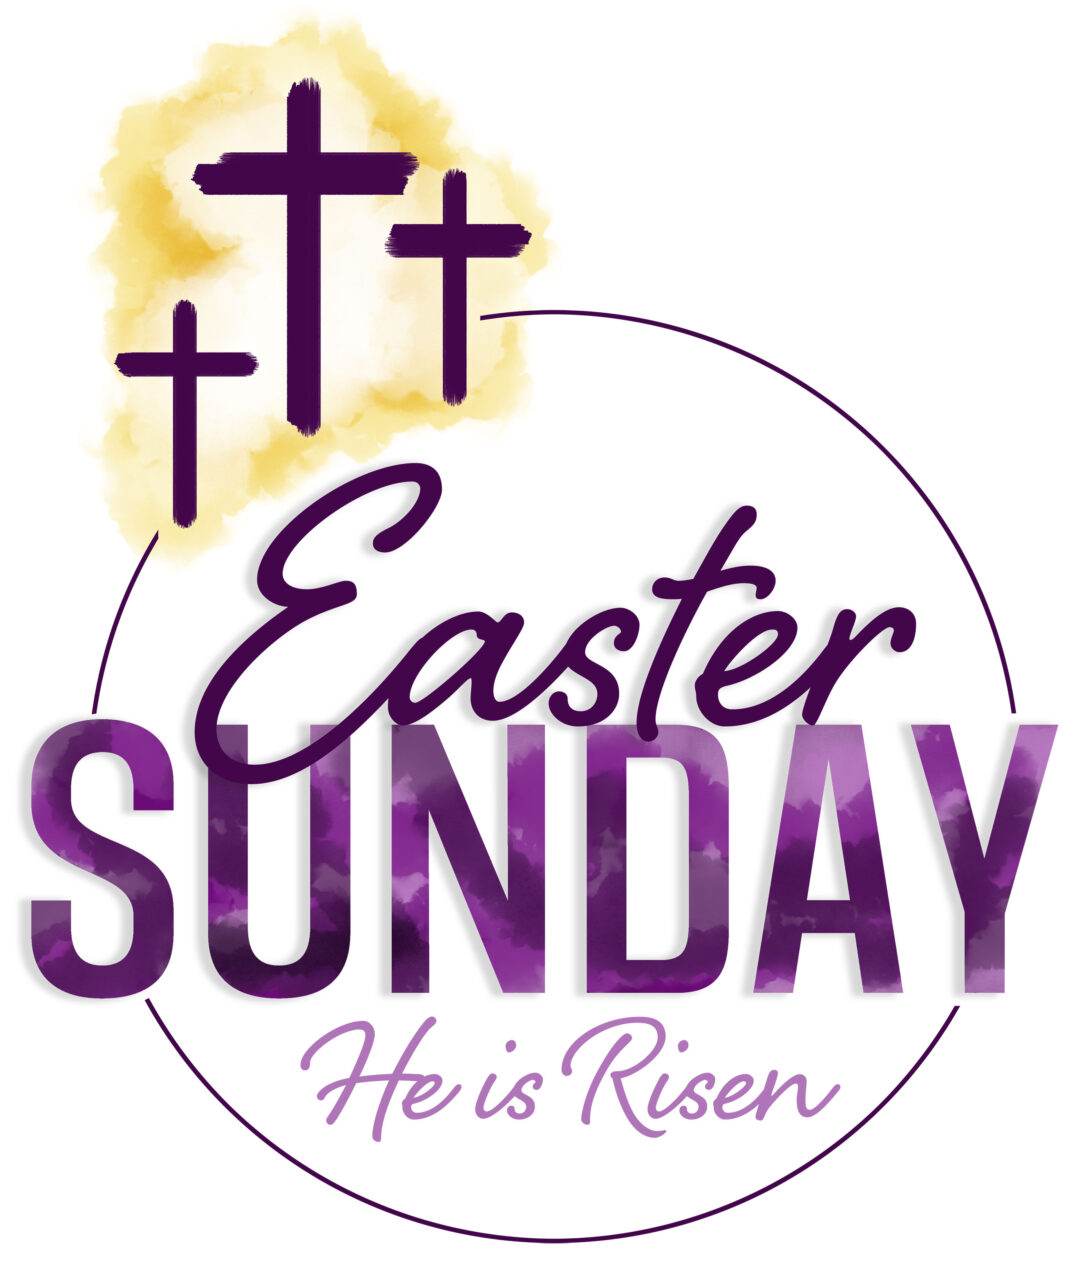 Streamed Worship Service – Easter Sunday